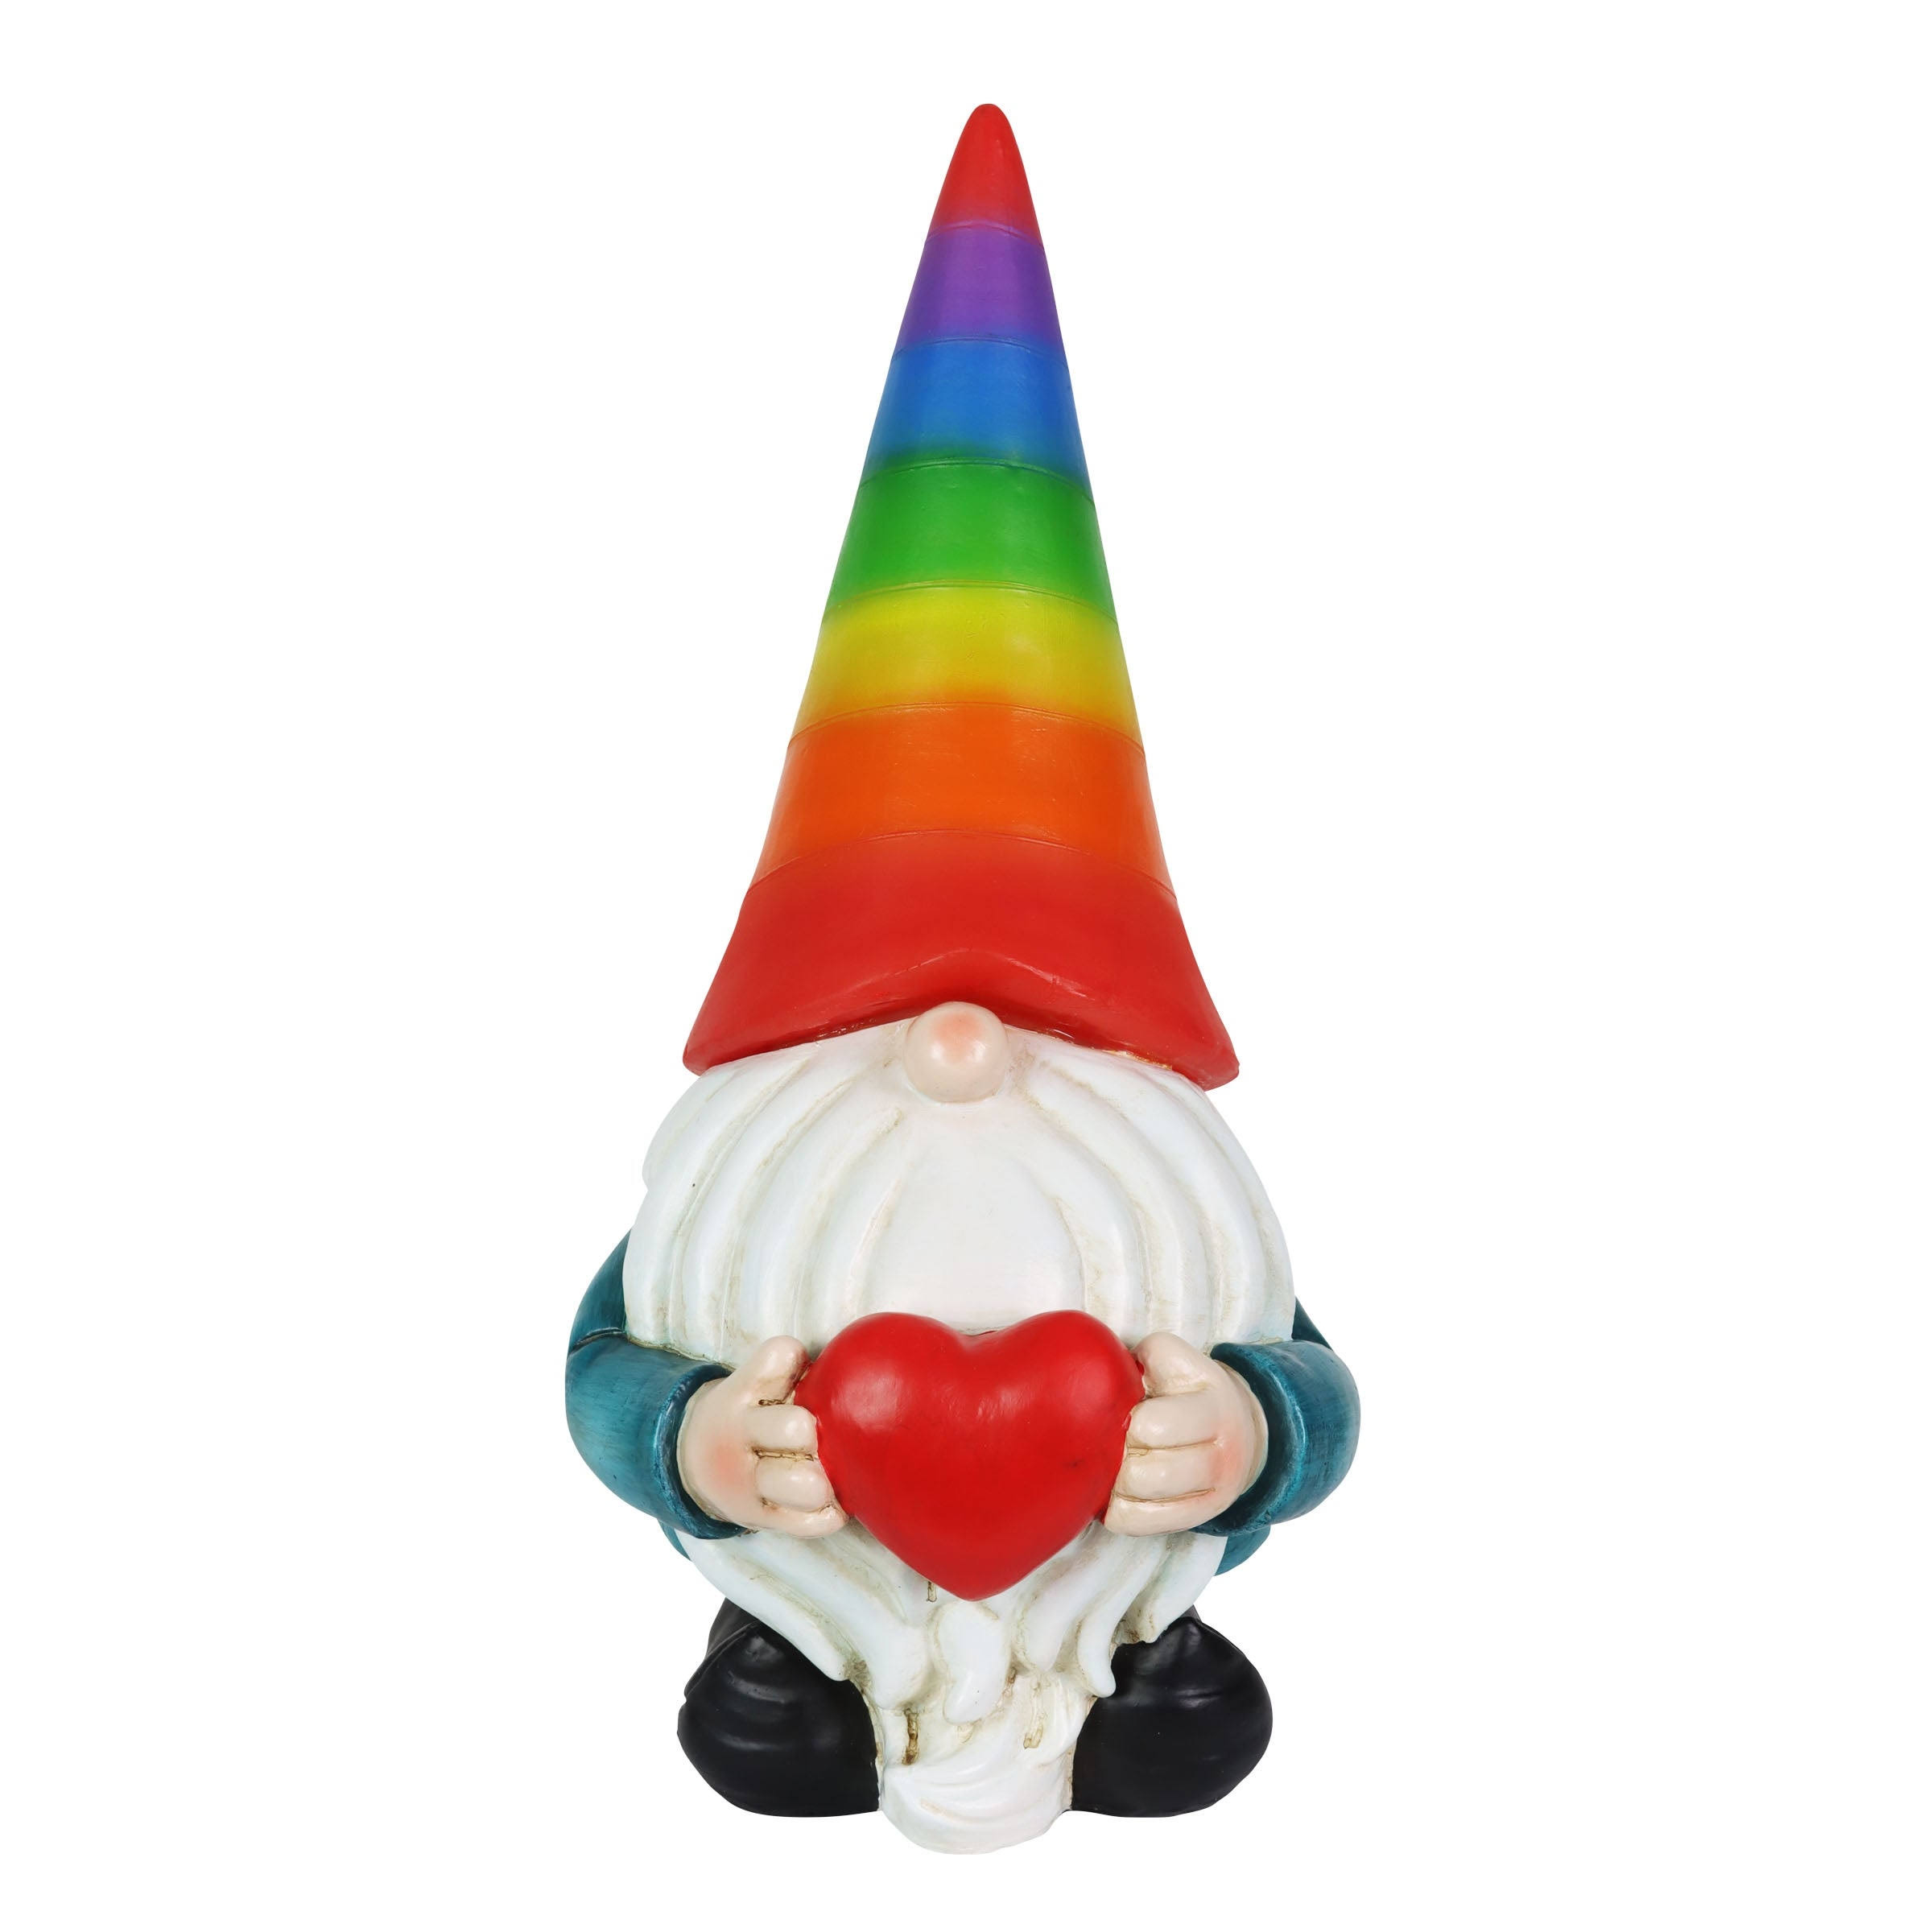 Exhart Solar Rainbow Hat Garden Gnome Statue, 6 by 12.5 Inches - Multi - Resin